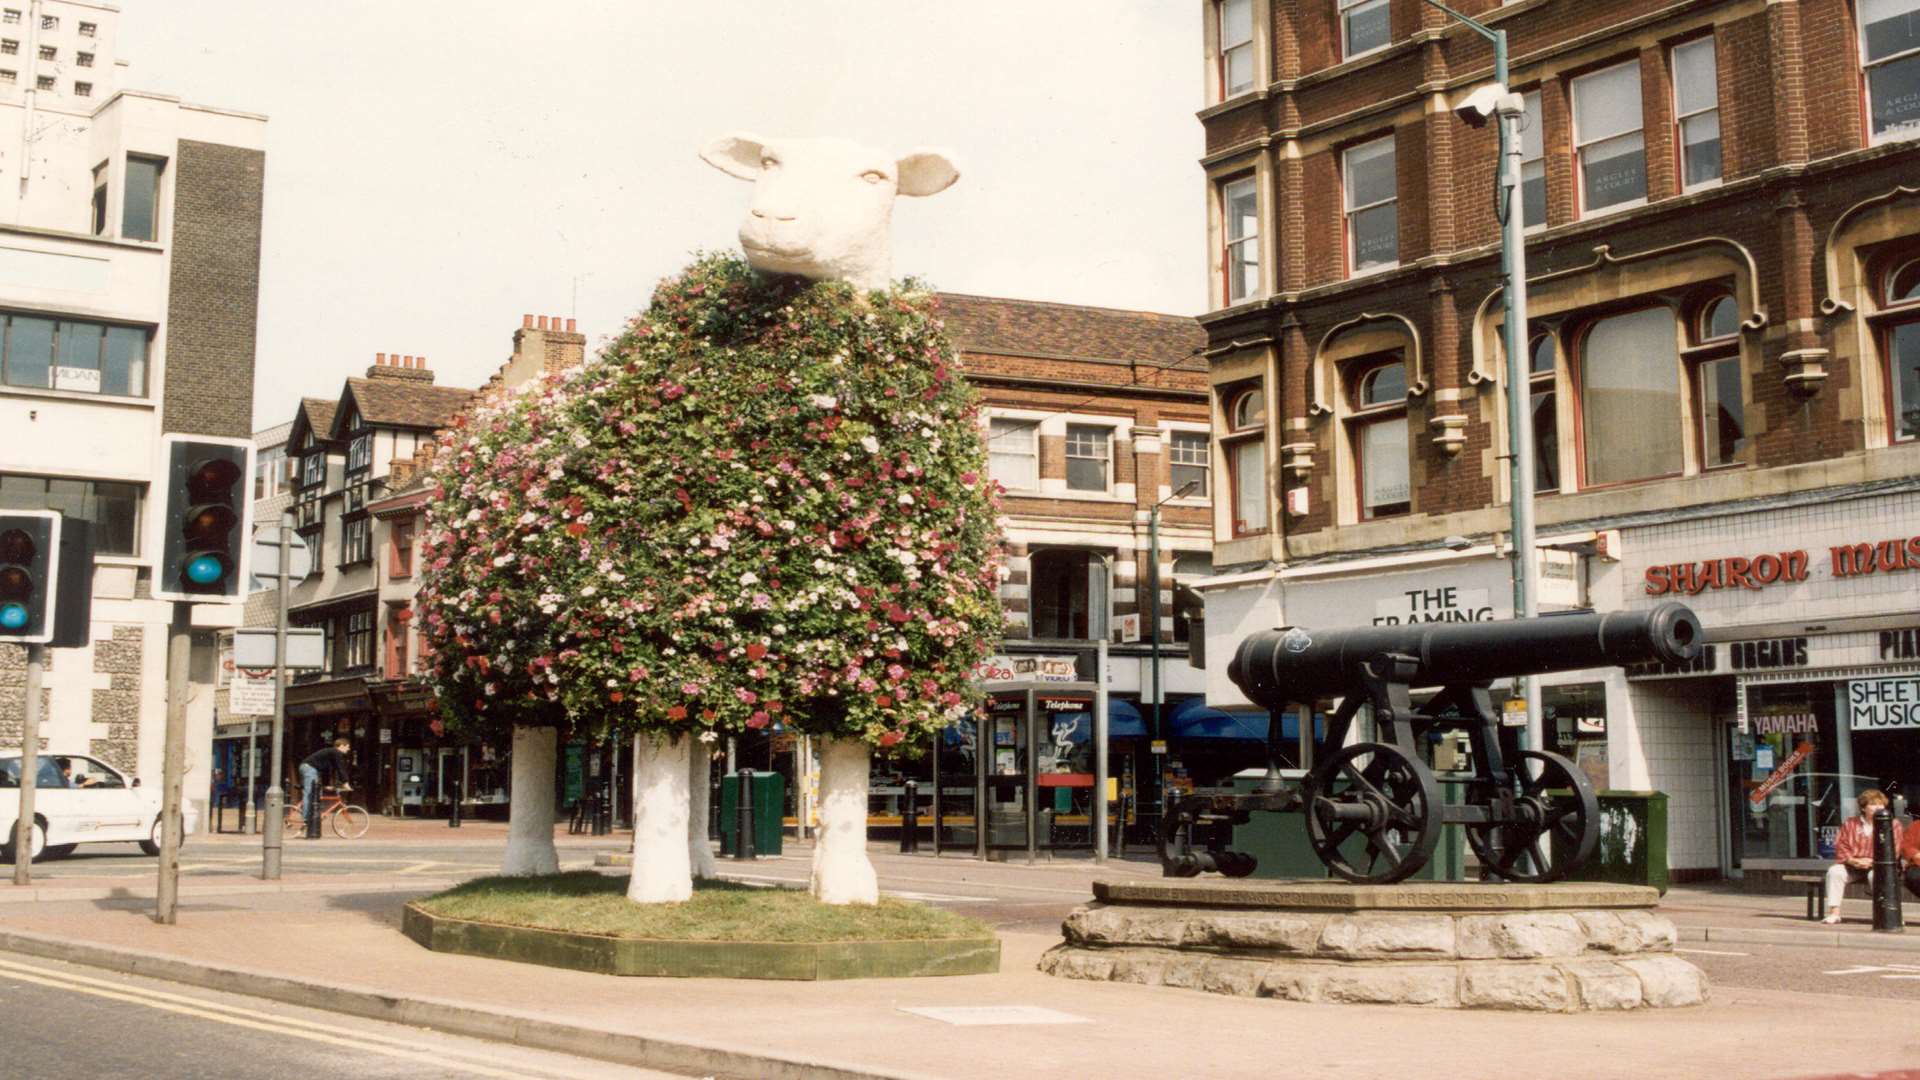 The giant floral sheep sat in Maidstone High Street.